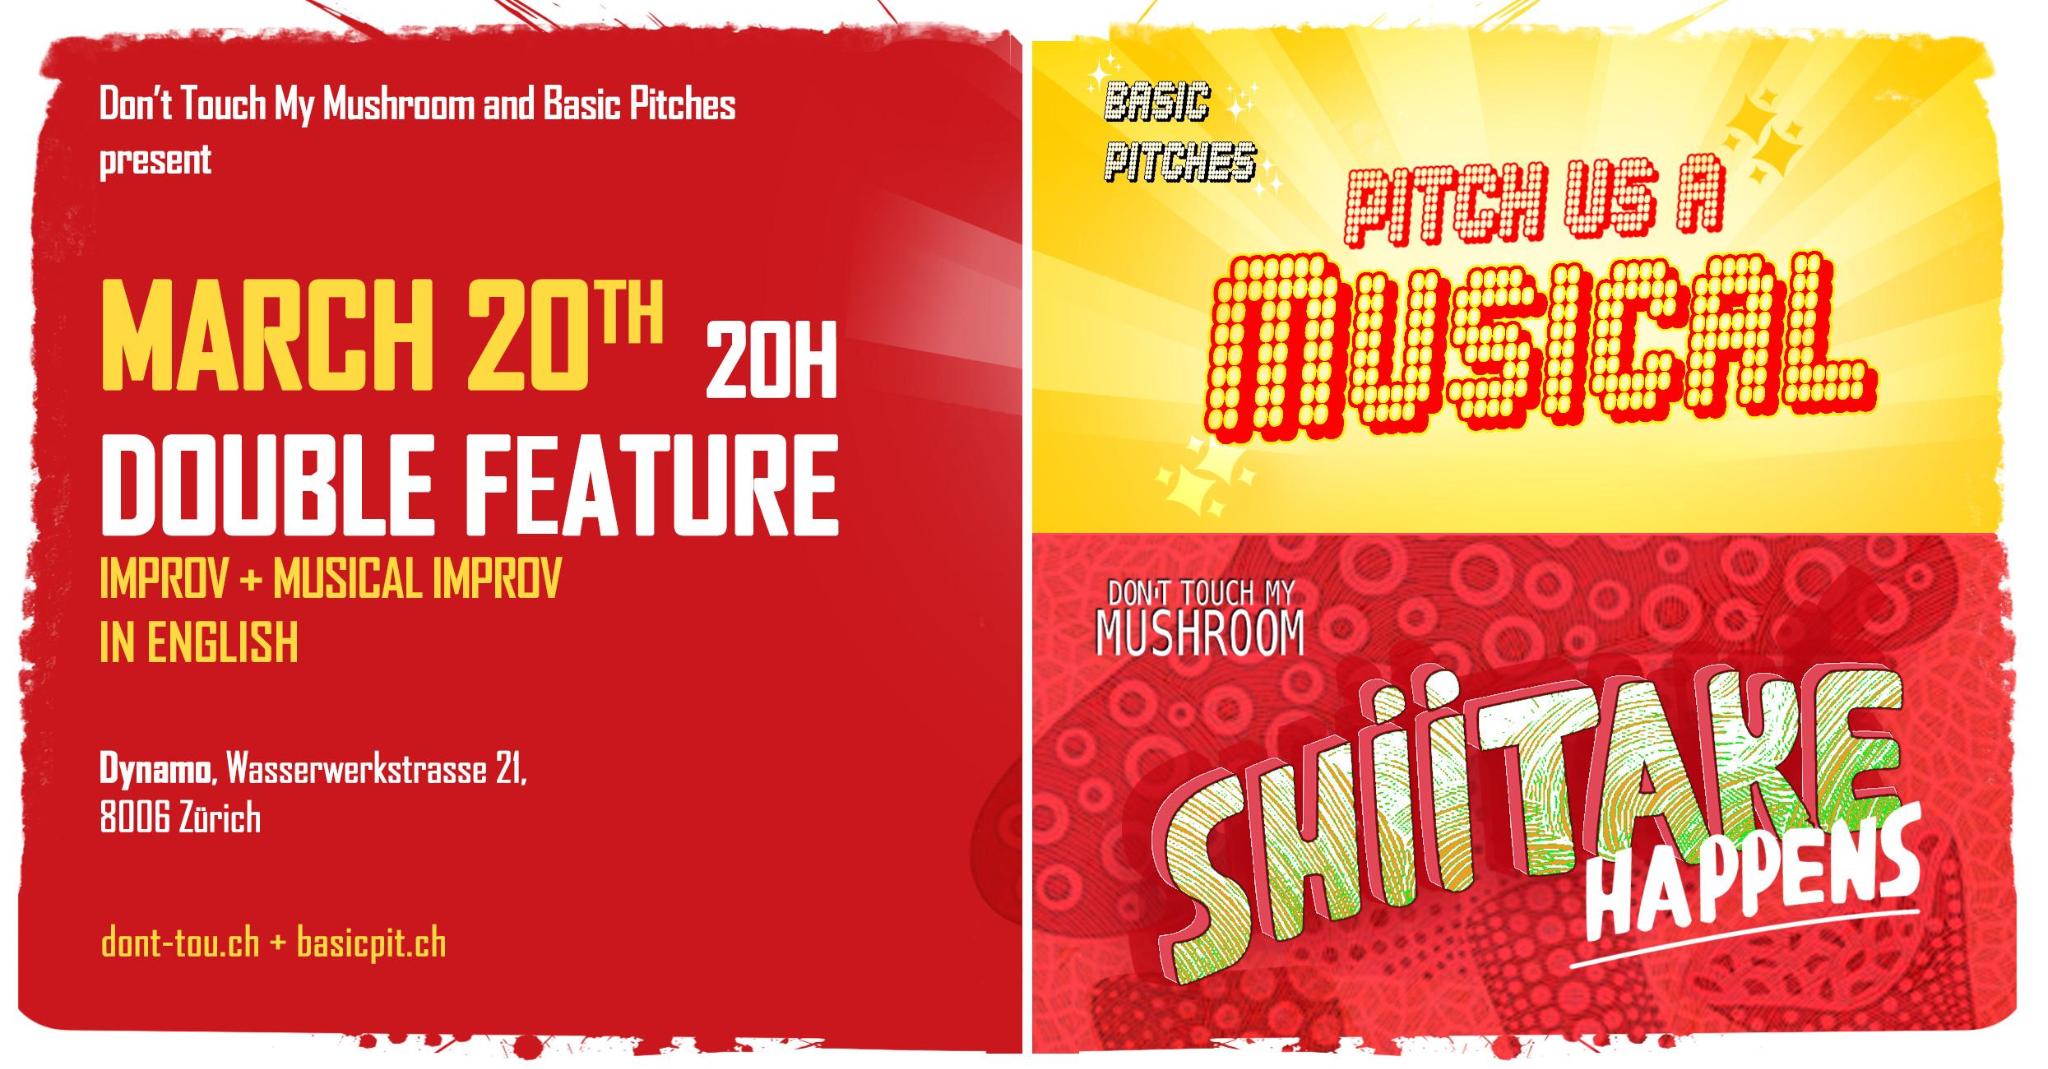 Double feature - Basic Pitches: Pitch us a Musical & DTMM: Shiitake Happens image